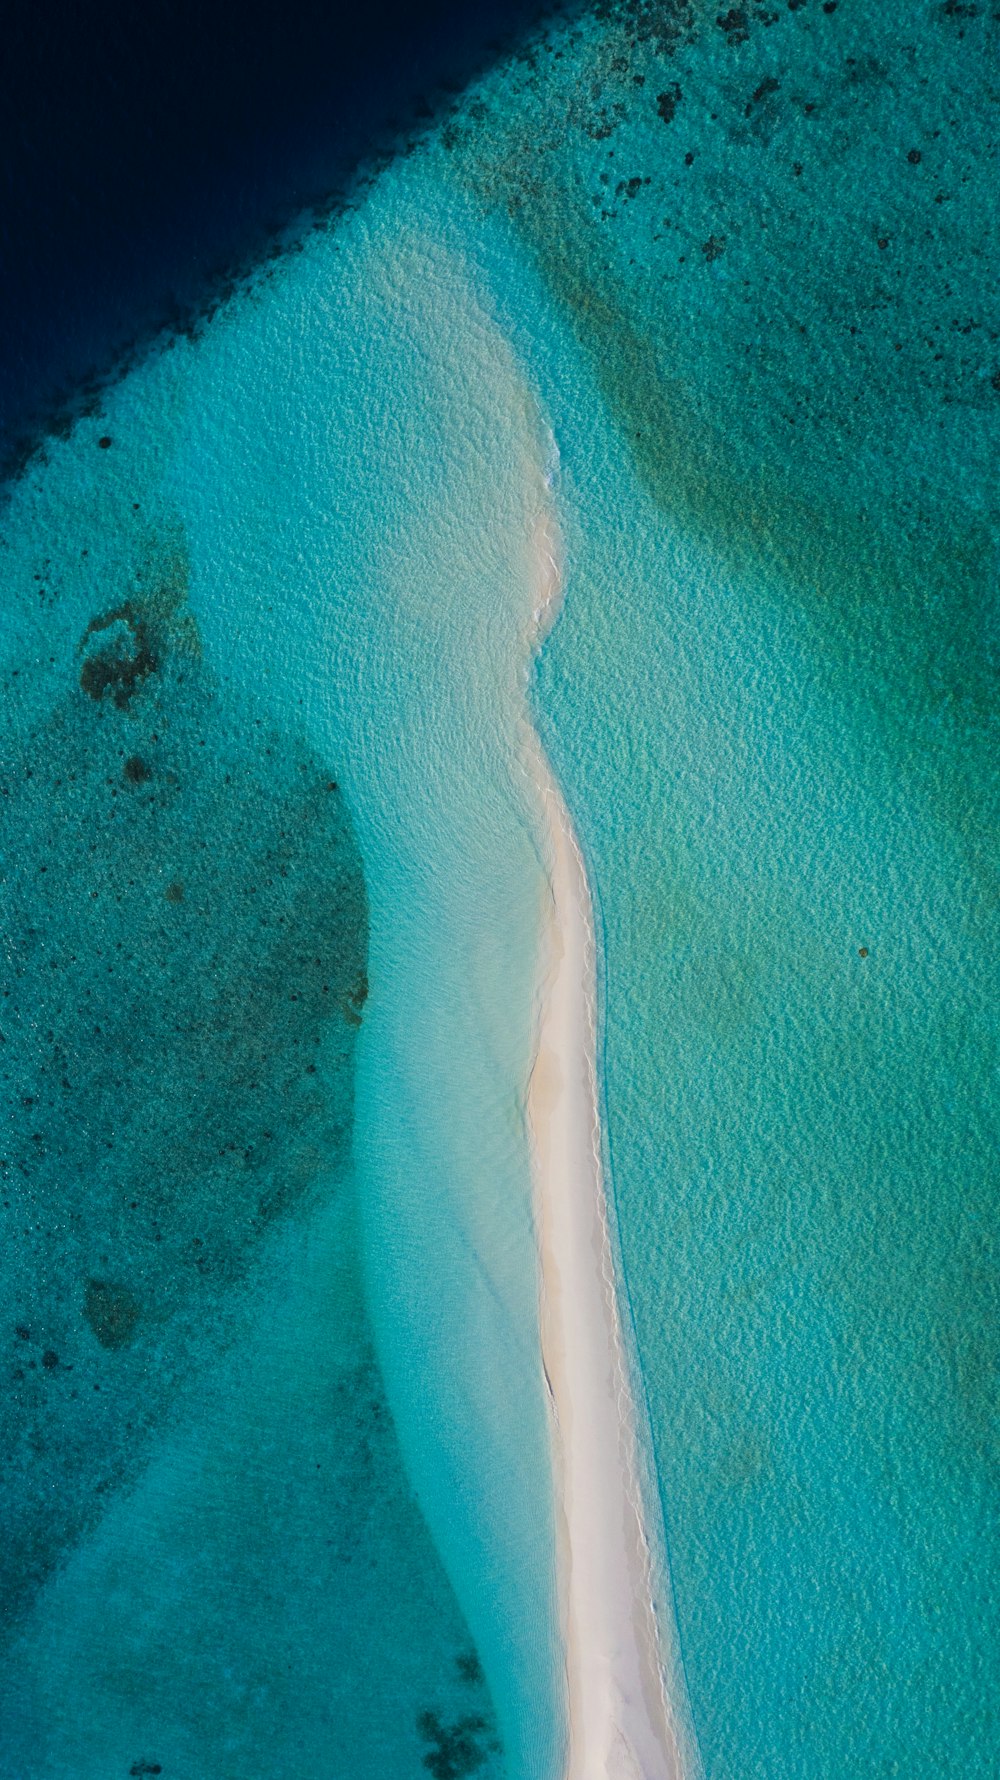 aerial view of sea